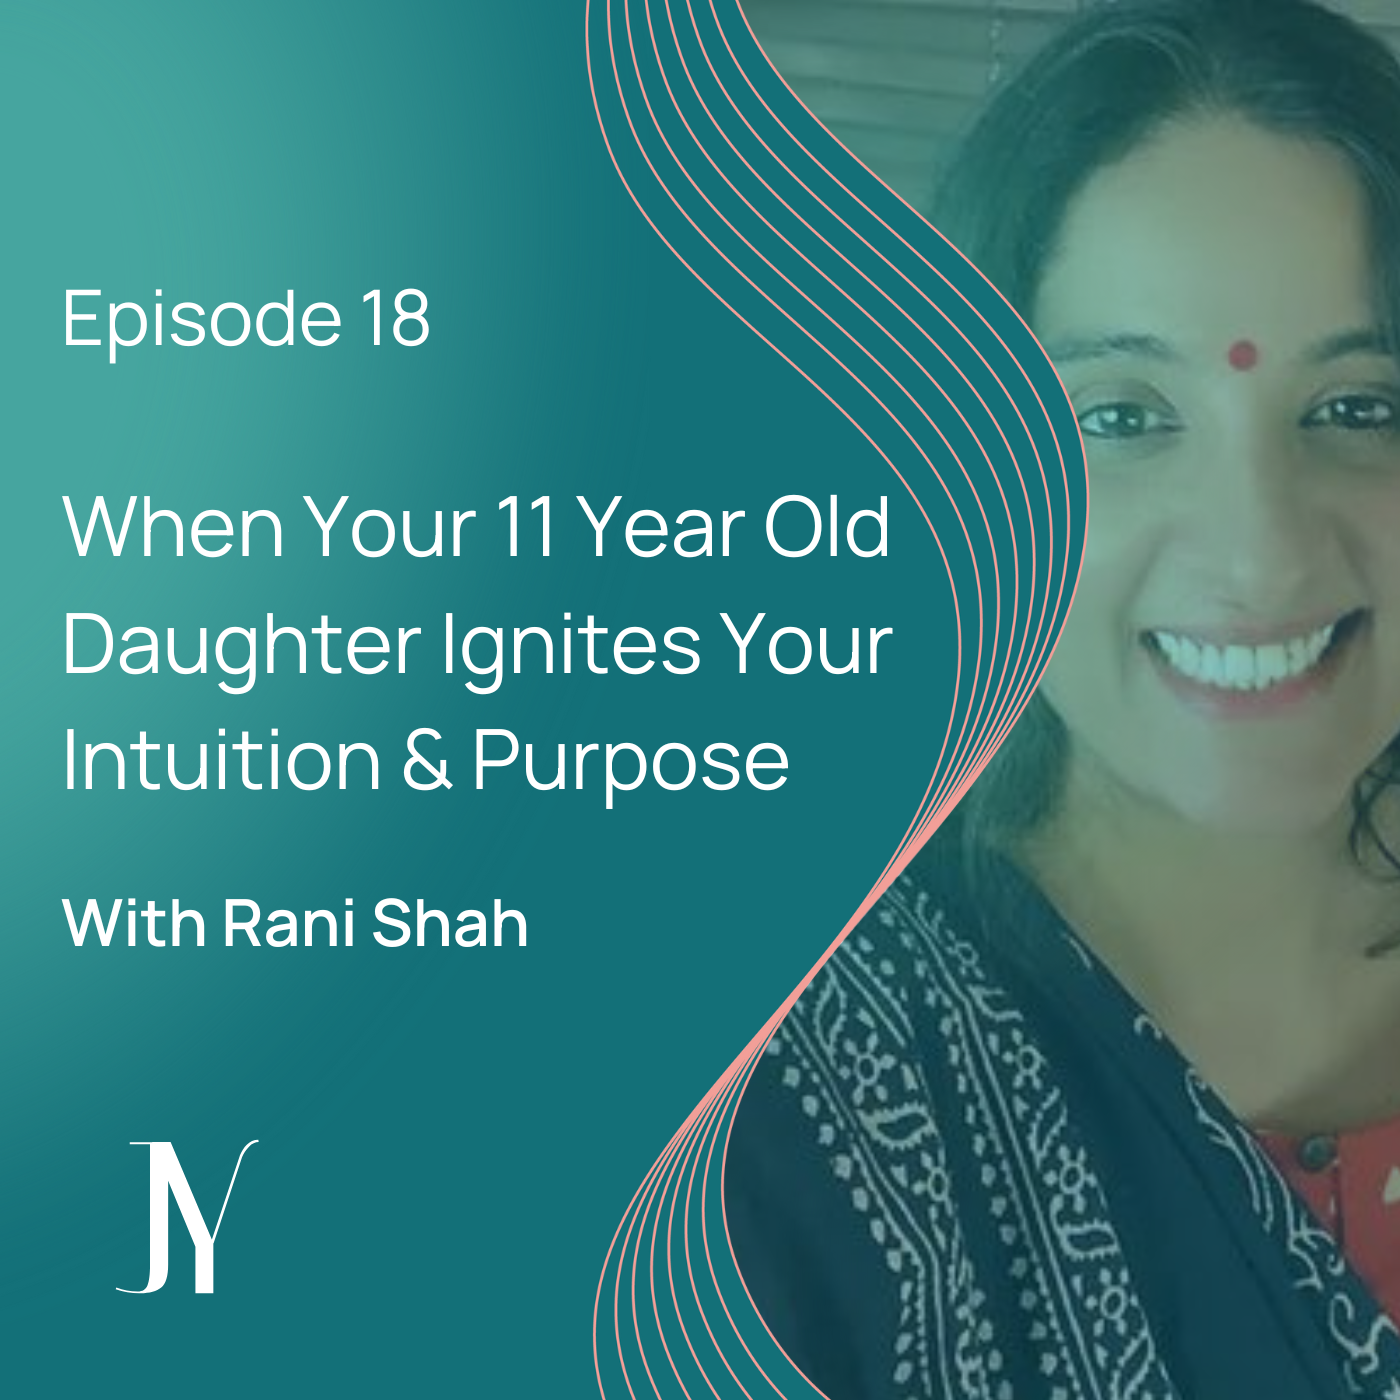 When-Your-11-Year-Old-Daughter-Ignites-Your-Intuition-&-Purpose_Rani-Shah_Intuitive-Business_Thumbnail